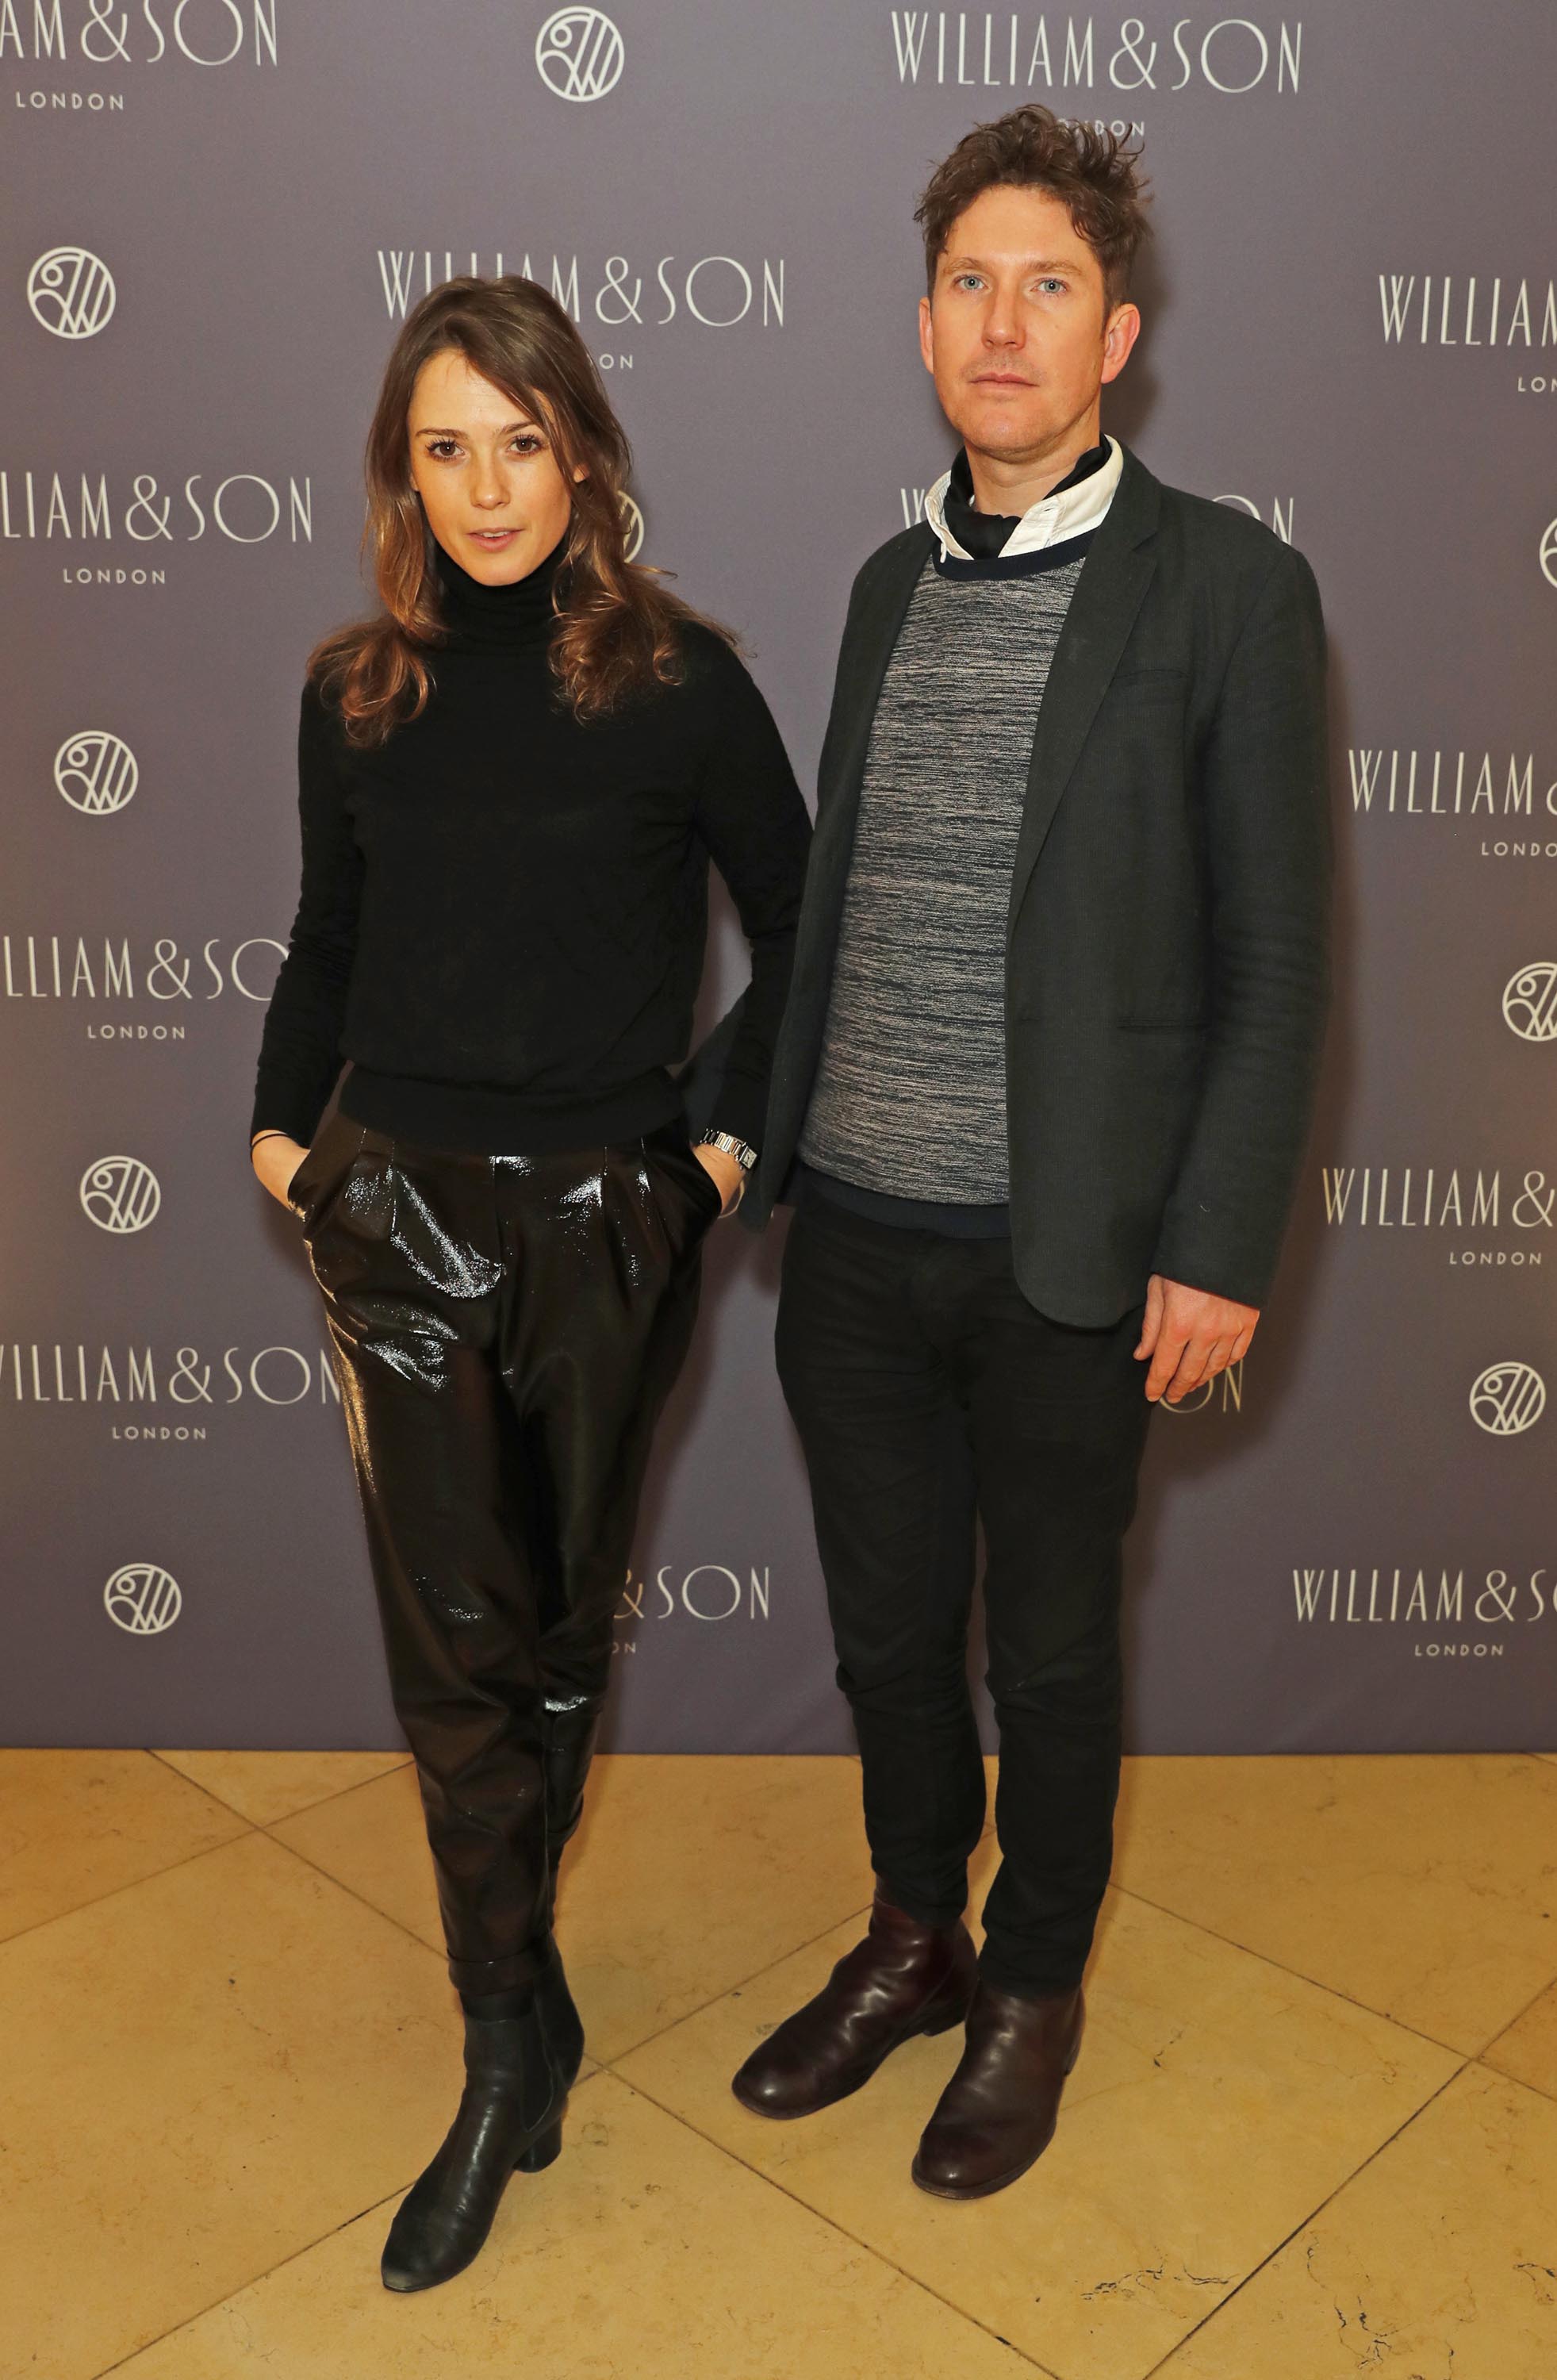 Caroline Lever attends the William & Son Gala cocktail party